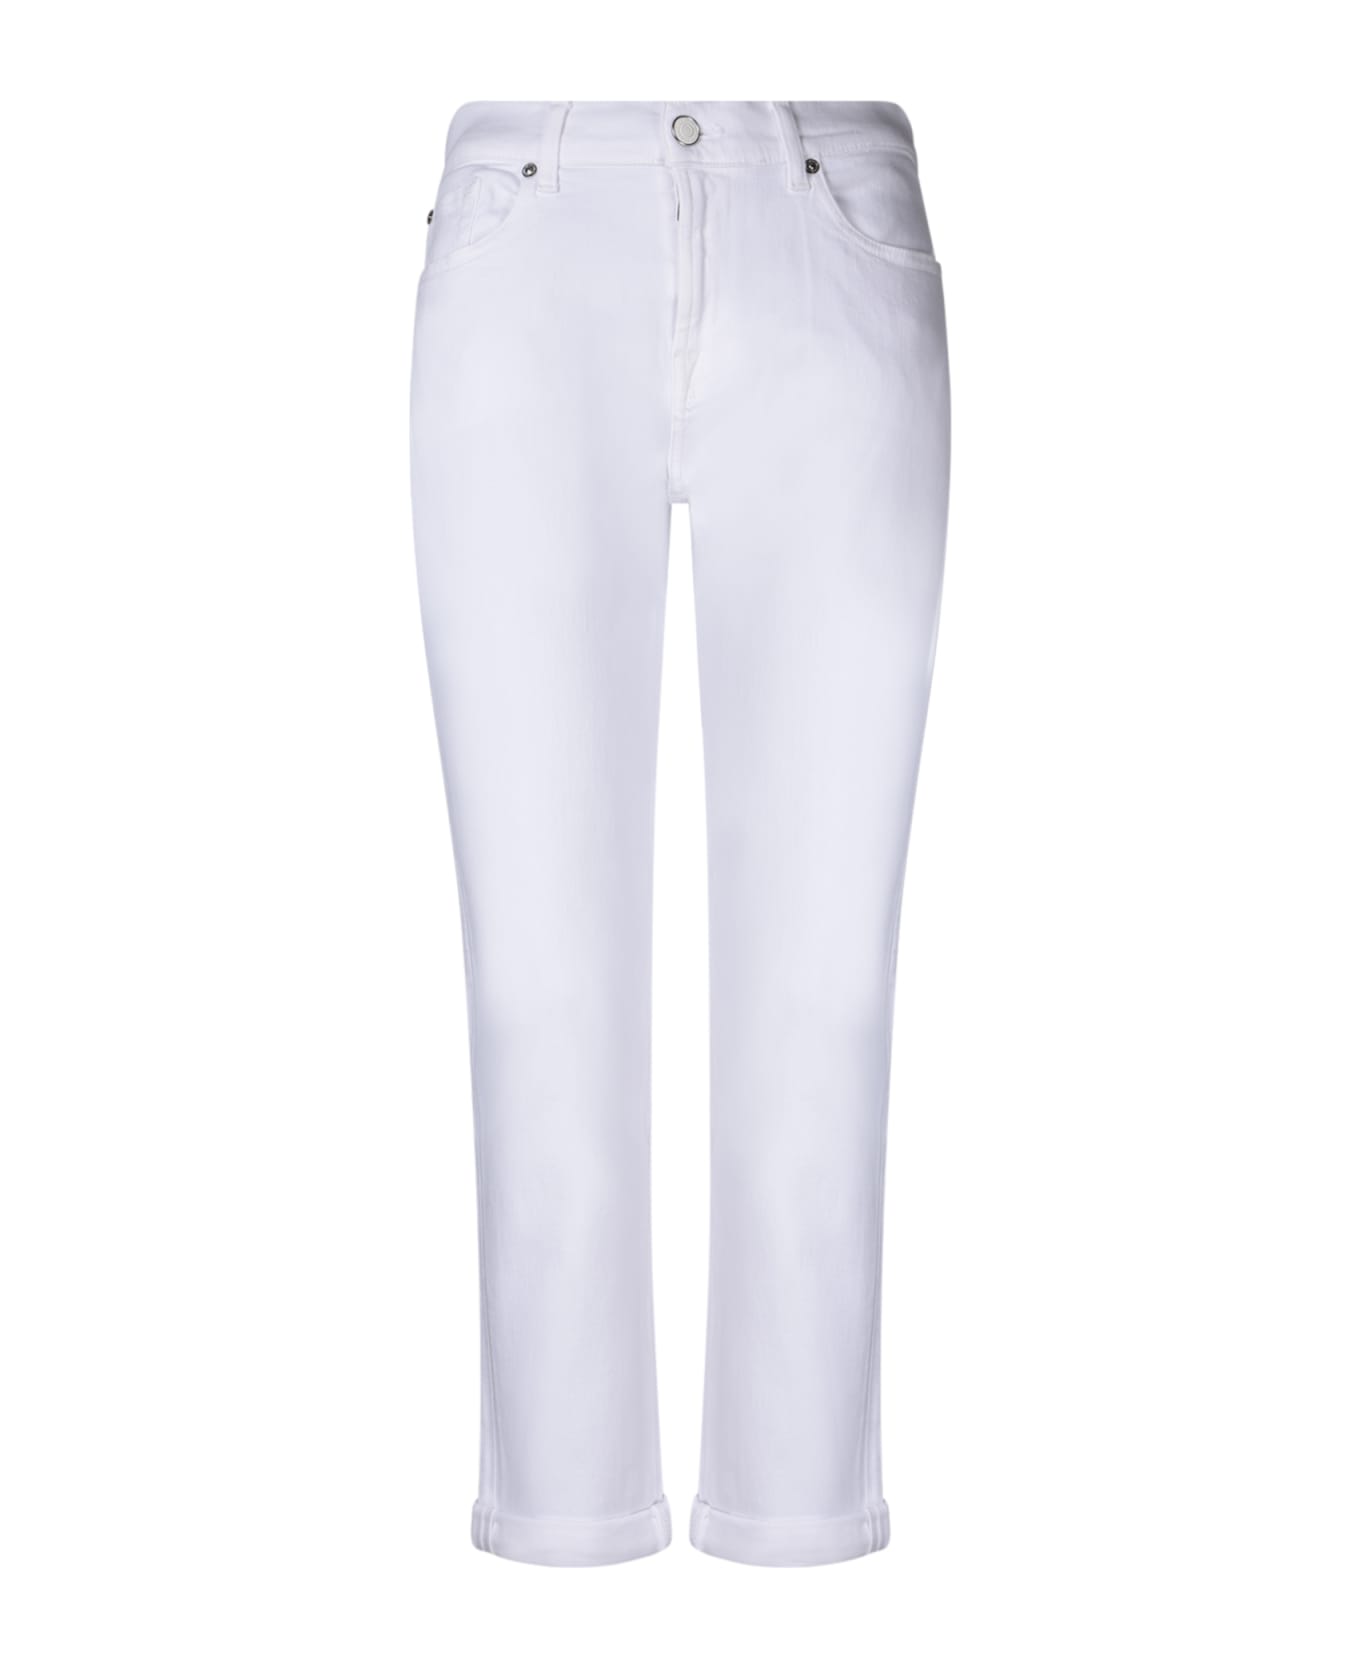 7 For All Mankind Josefina White Jeans By 7 For All Mankind - White